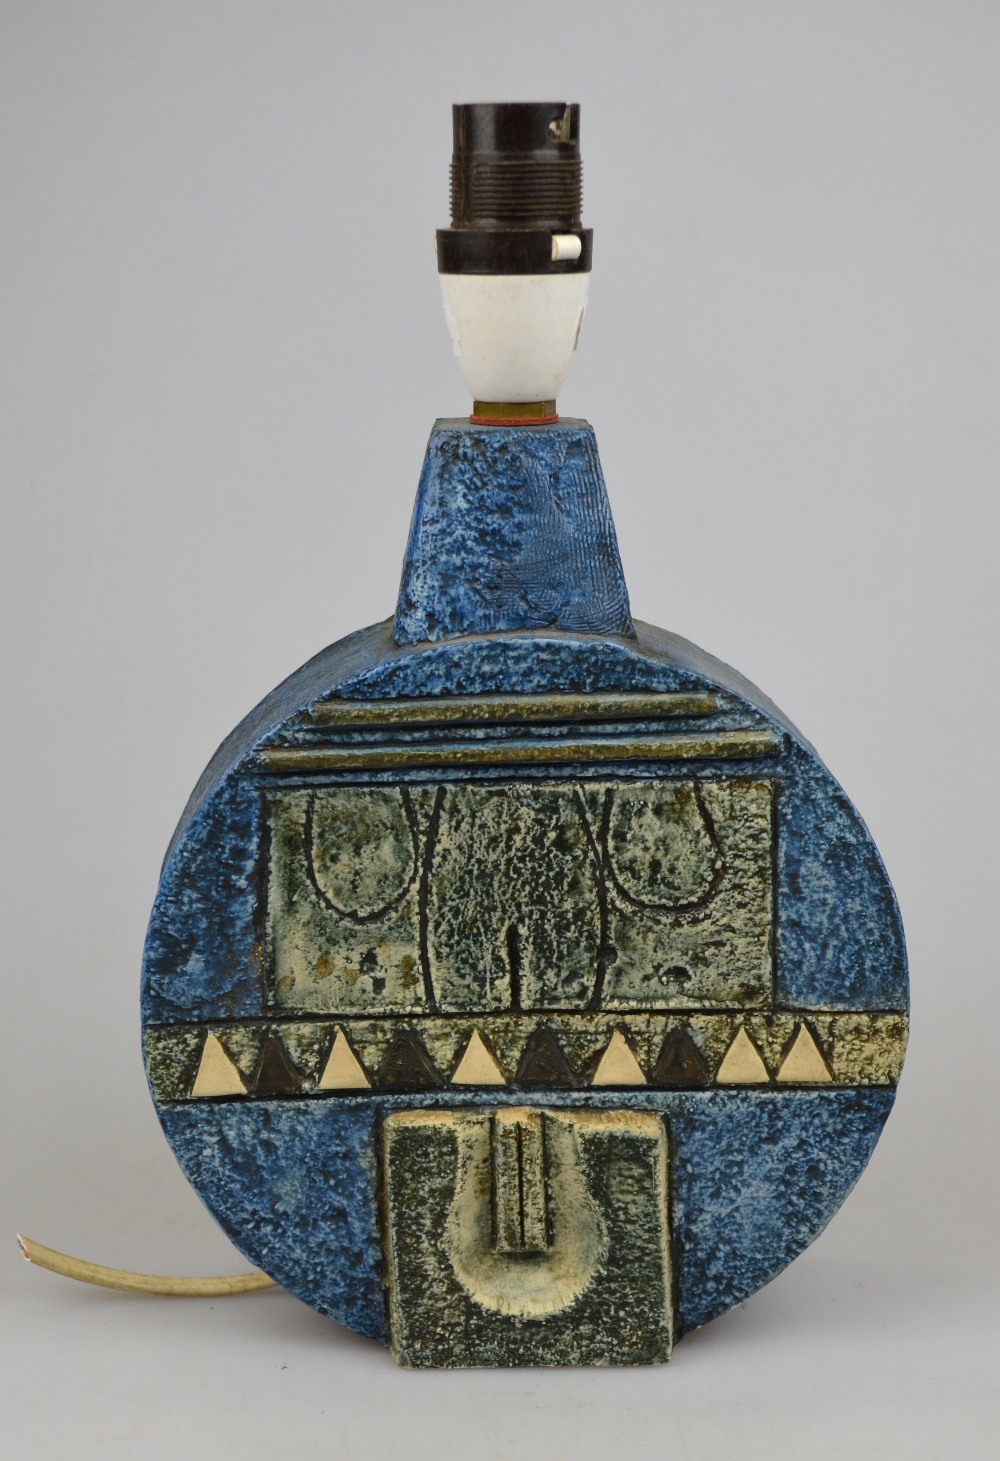 Troika Pottery wheel lamp base moulded with geometric designs on a blue ground, 20.5 cm excluding